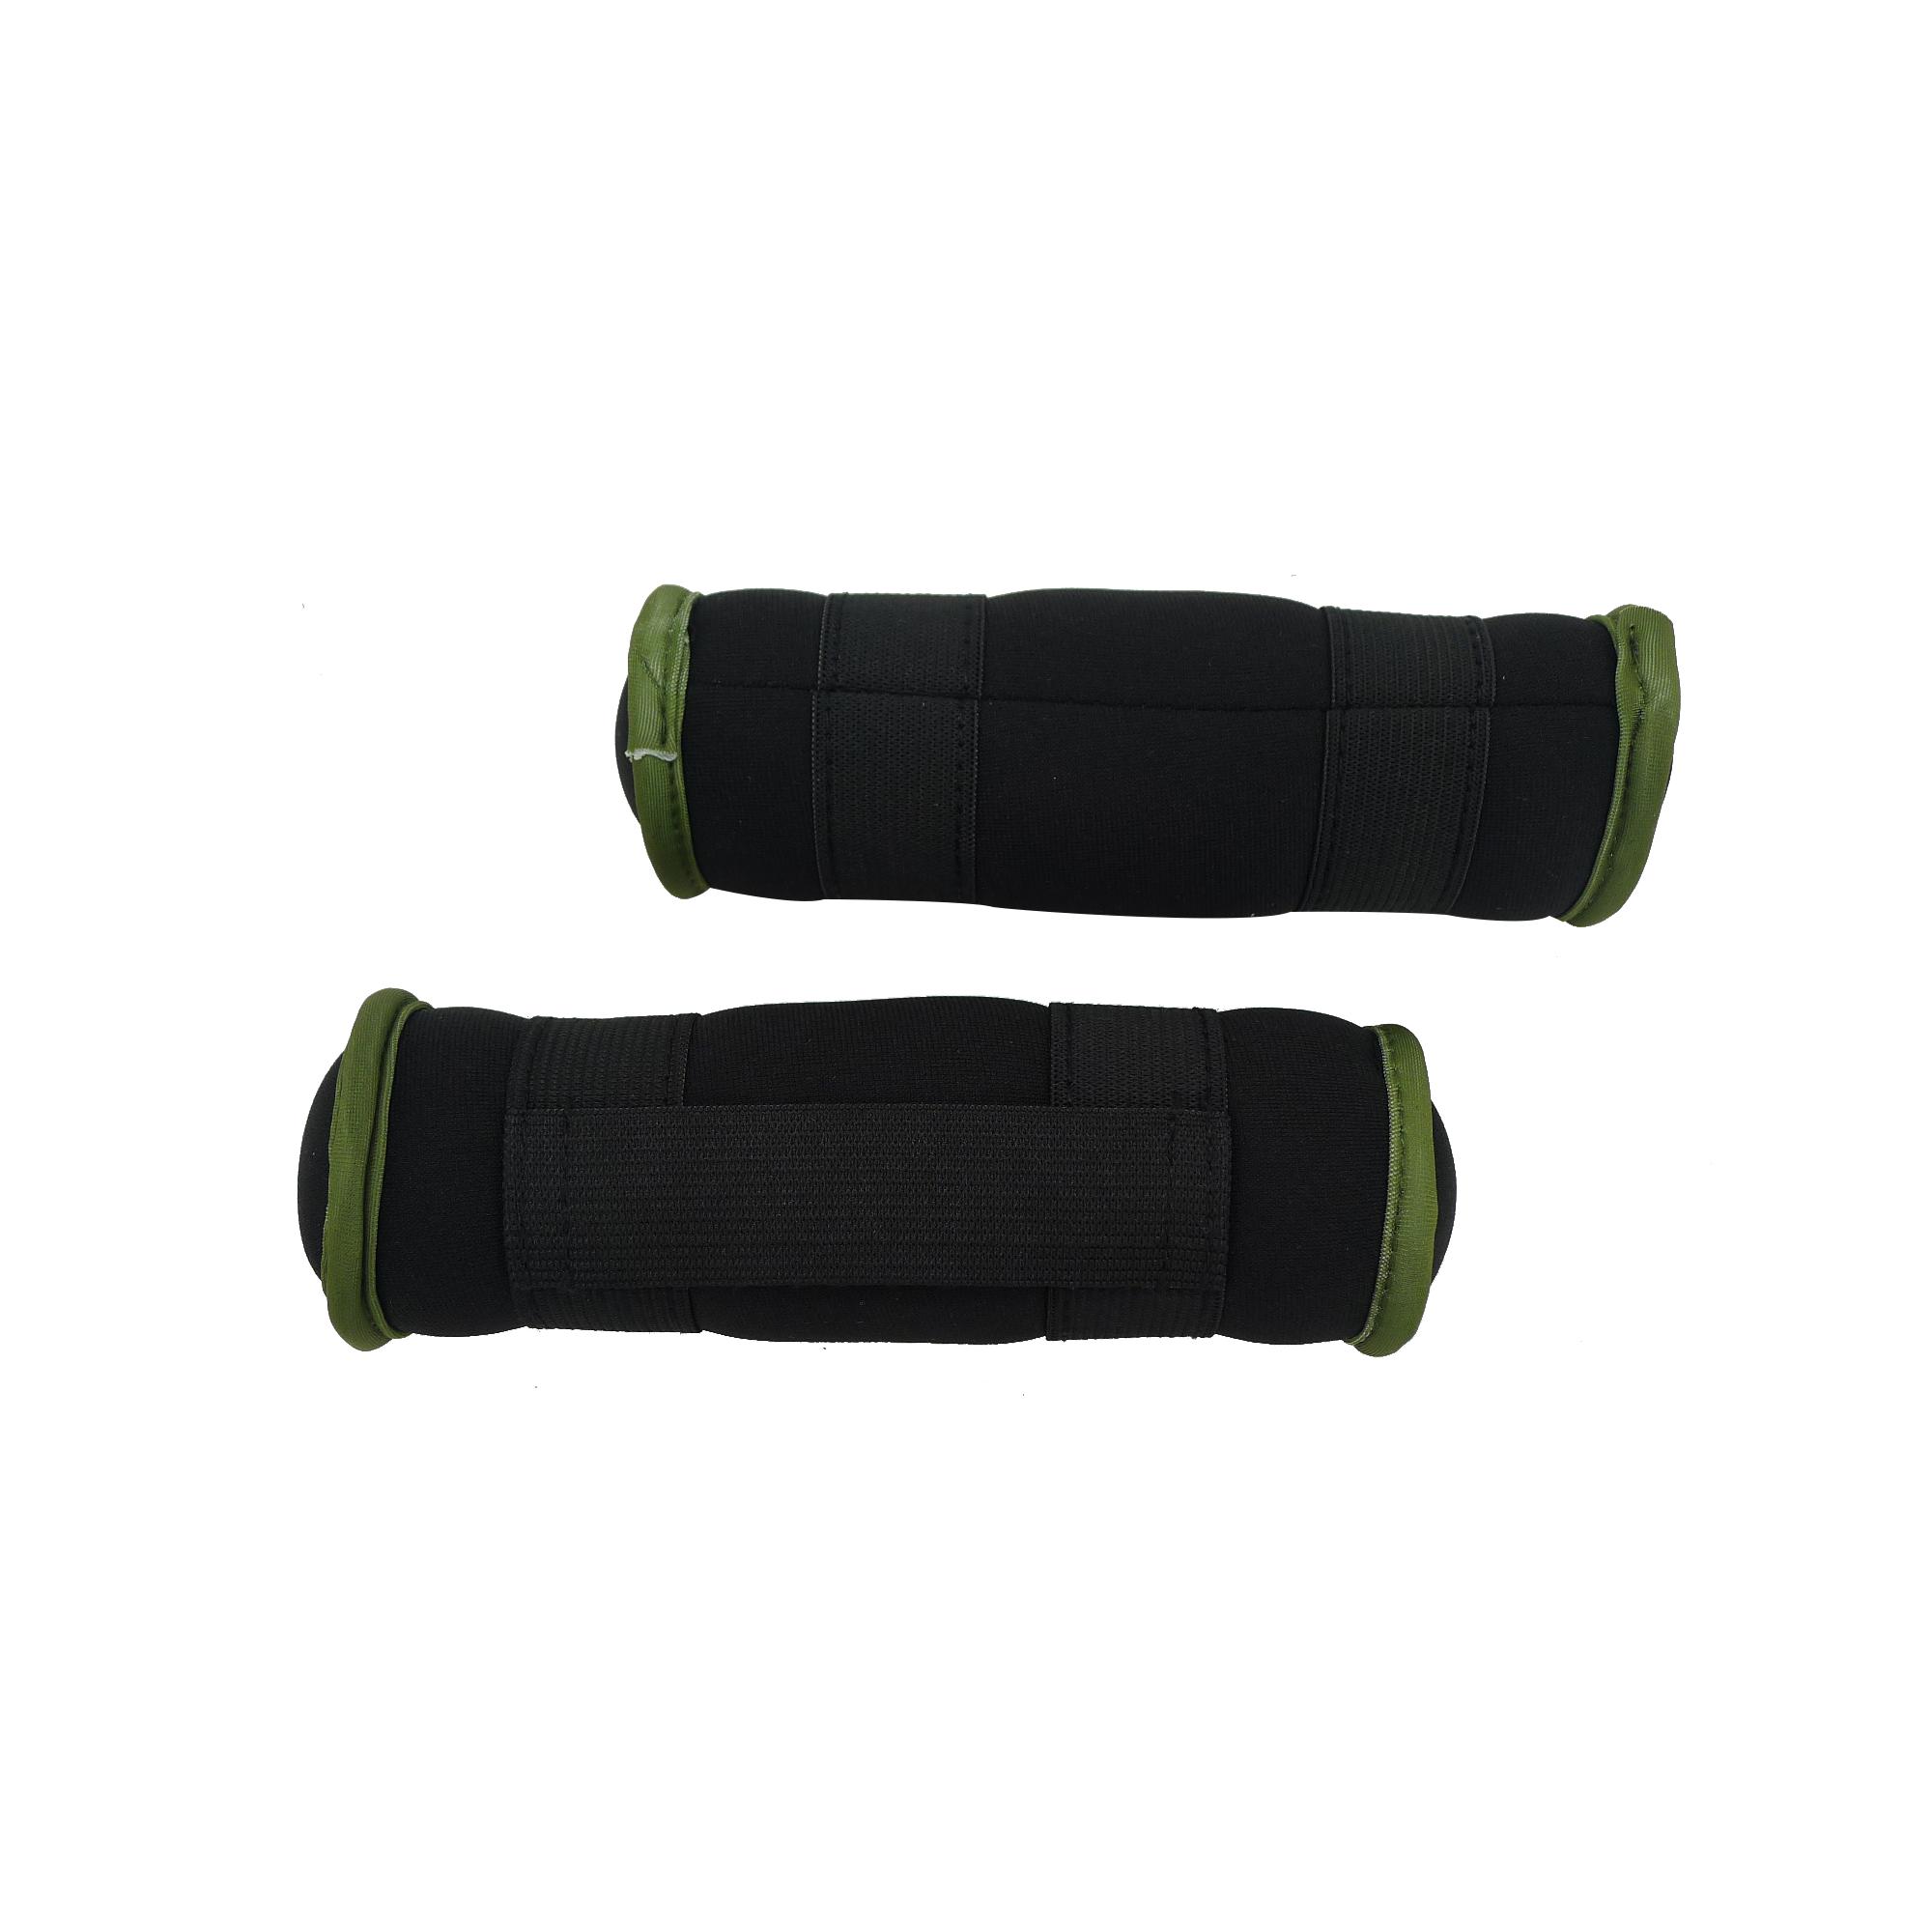 0.5KG SOFT WEIGHT DUMBBELL - 305-0300045